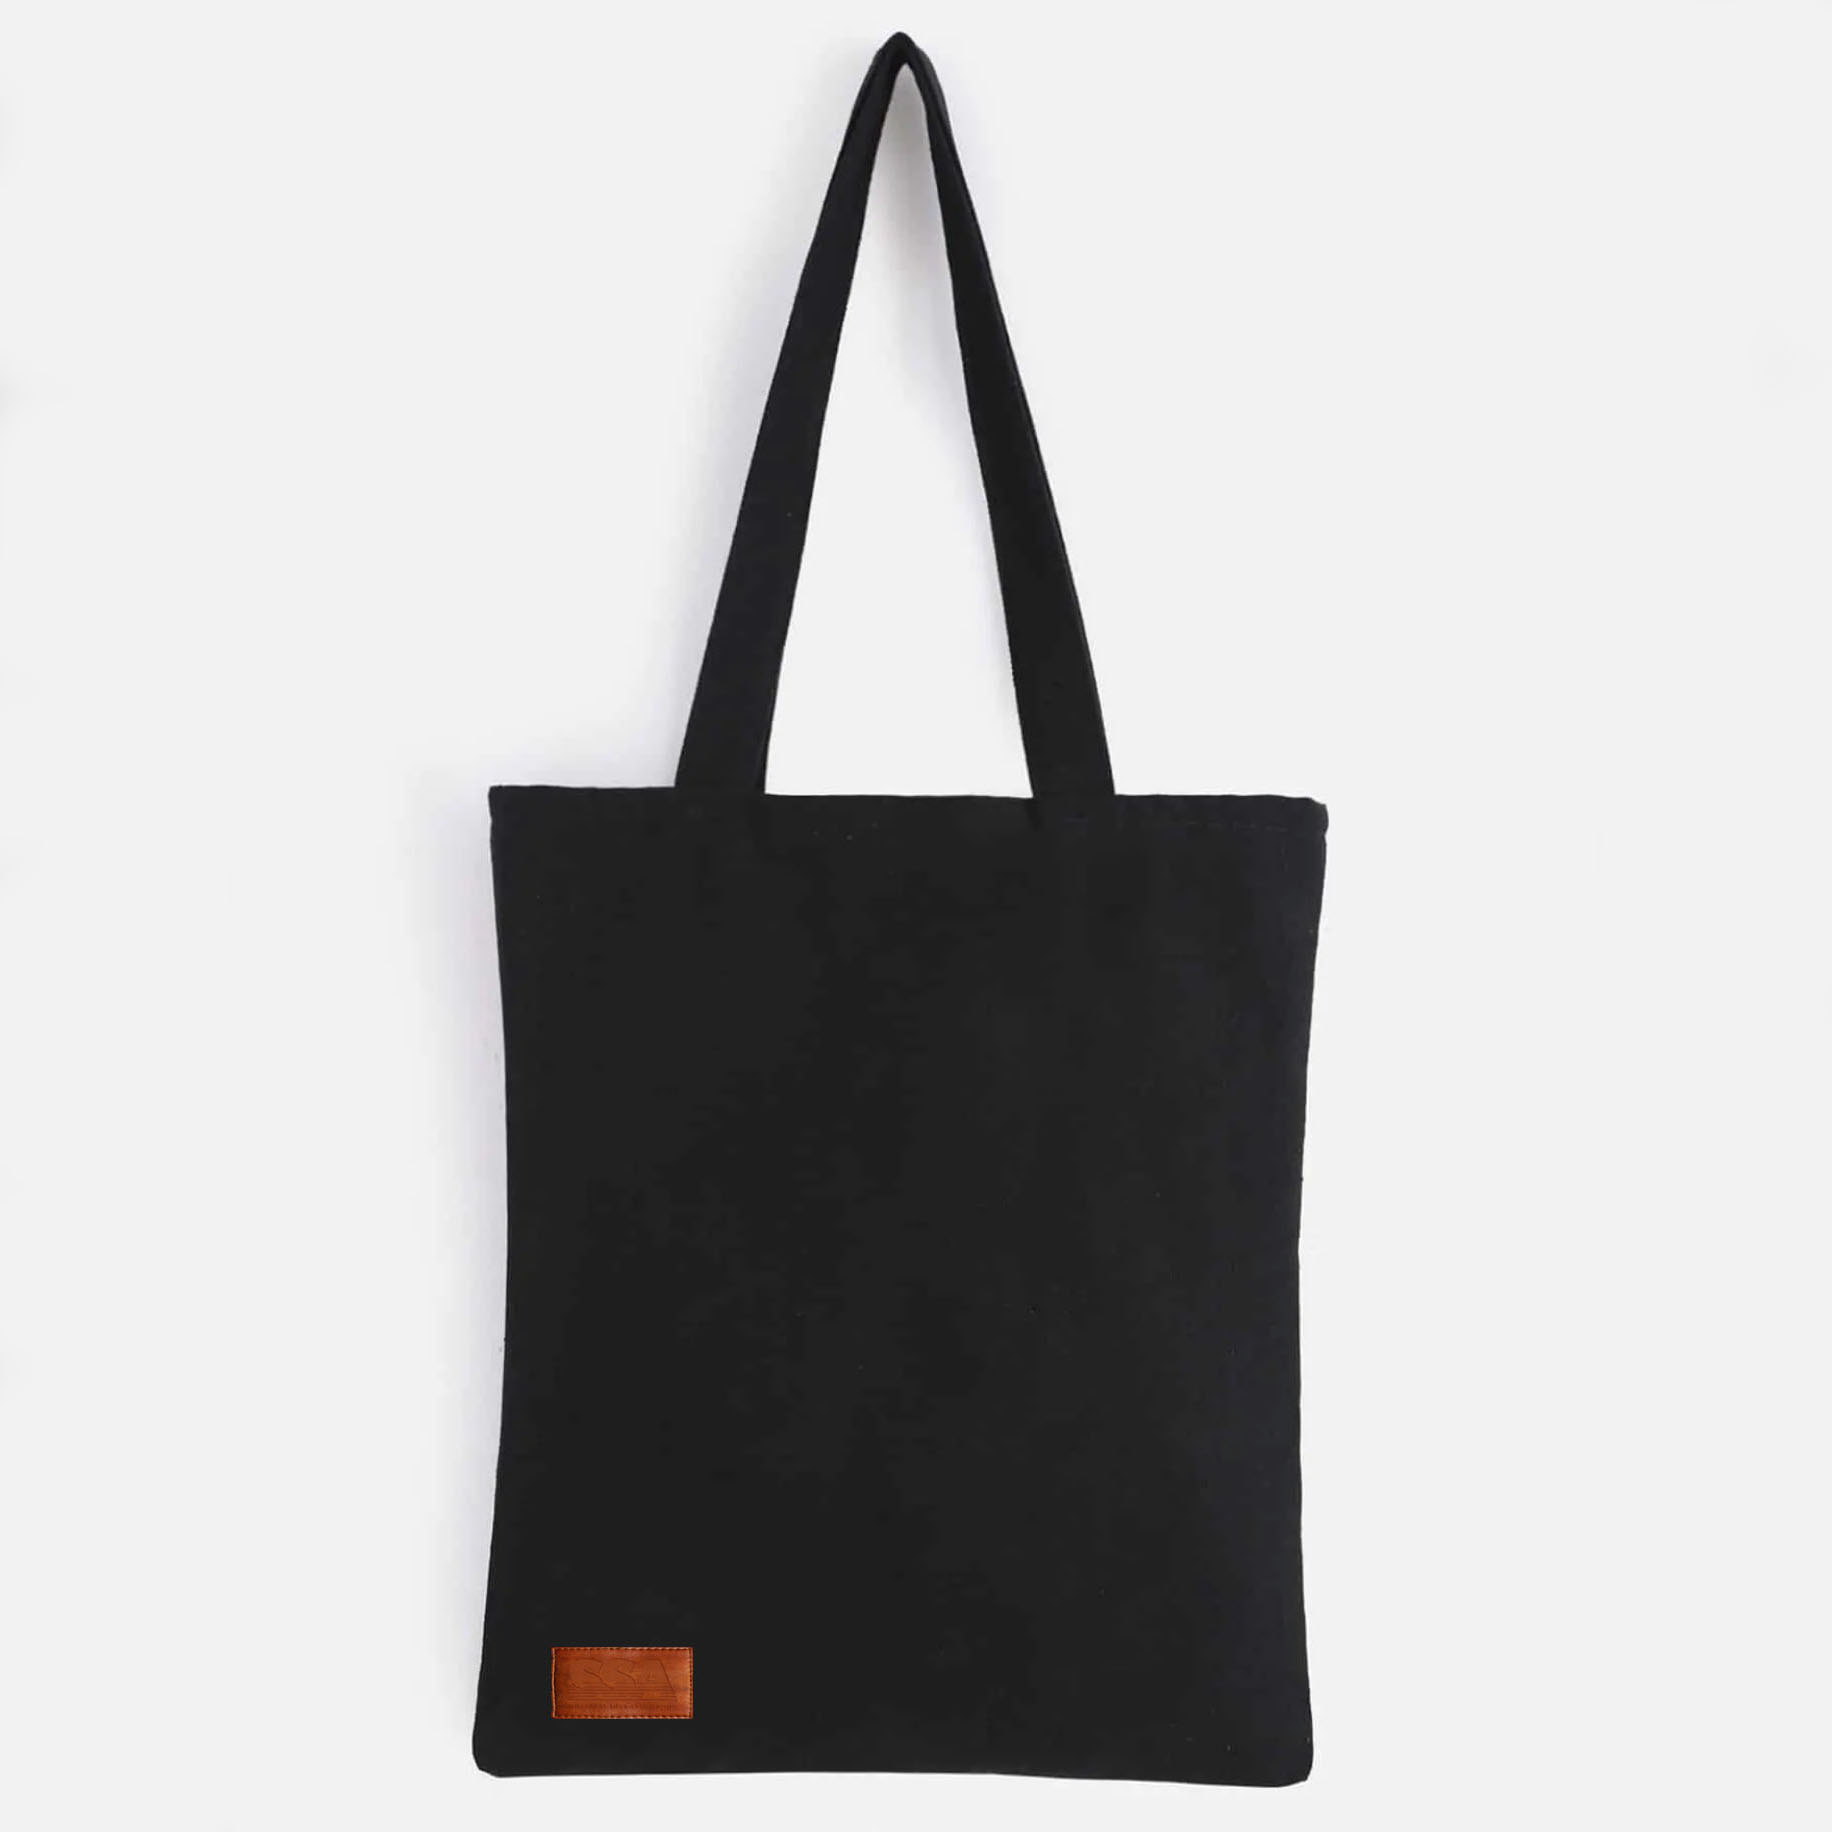 Shop Durable and Long-Lasting Canvas Tote Bag |BannerBuzz CA